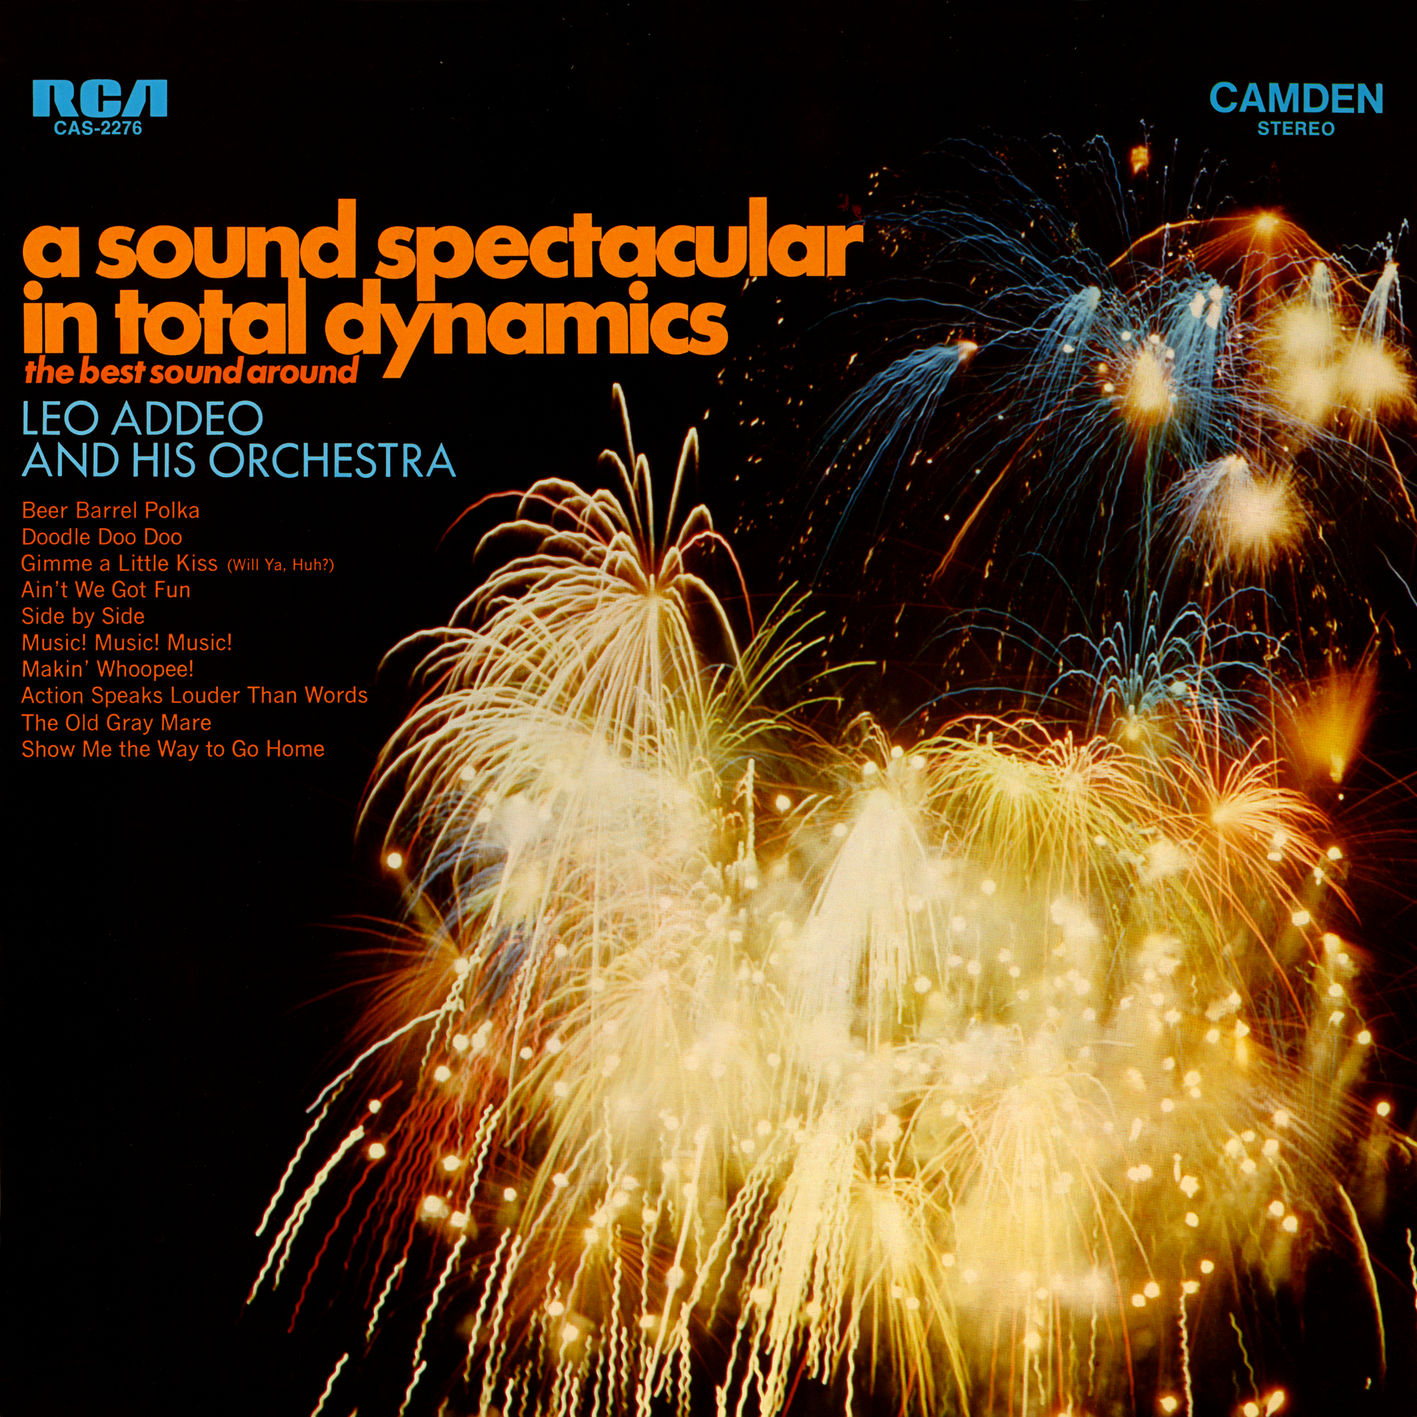 Leo Addeo And His Orchestra - A Sound Spectacular In Total Dynamics (1968/2018) [FLAC 24bit/192kHz]